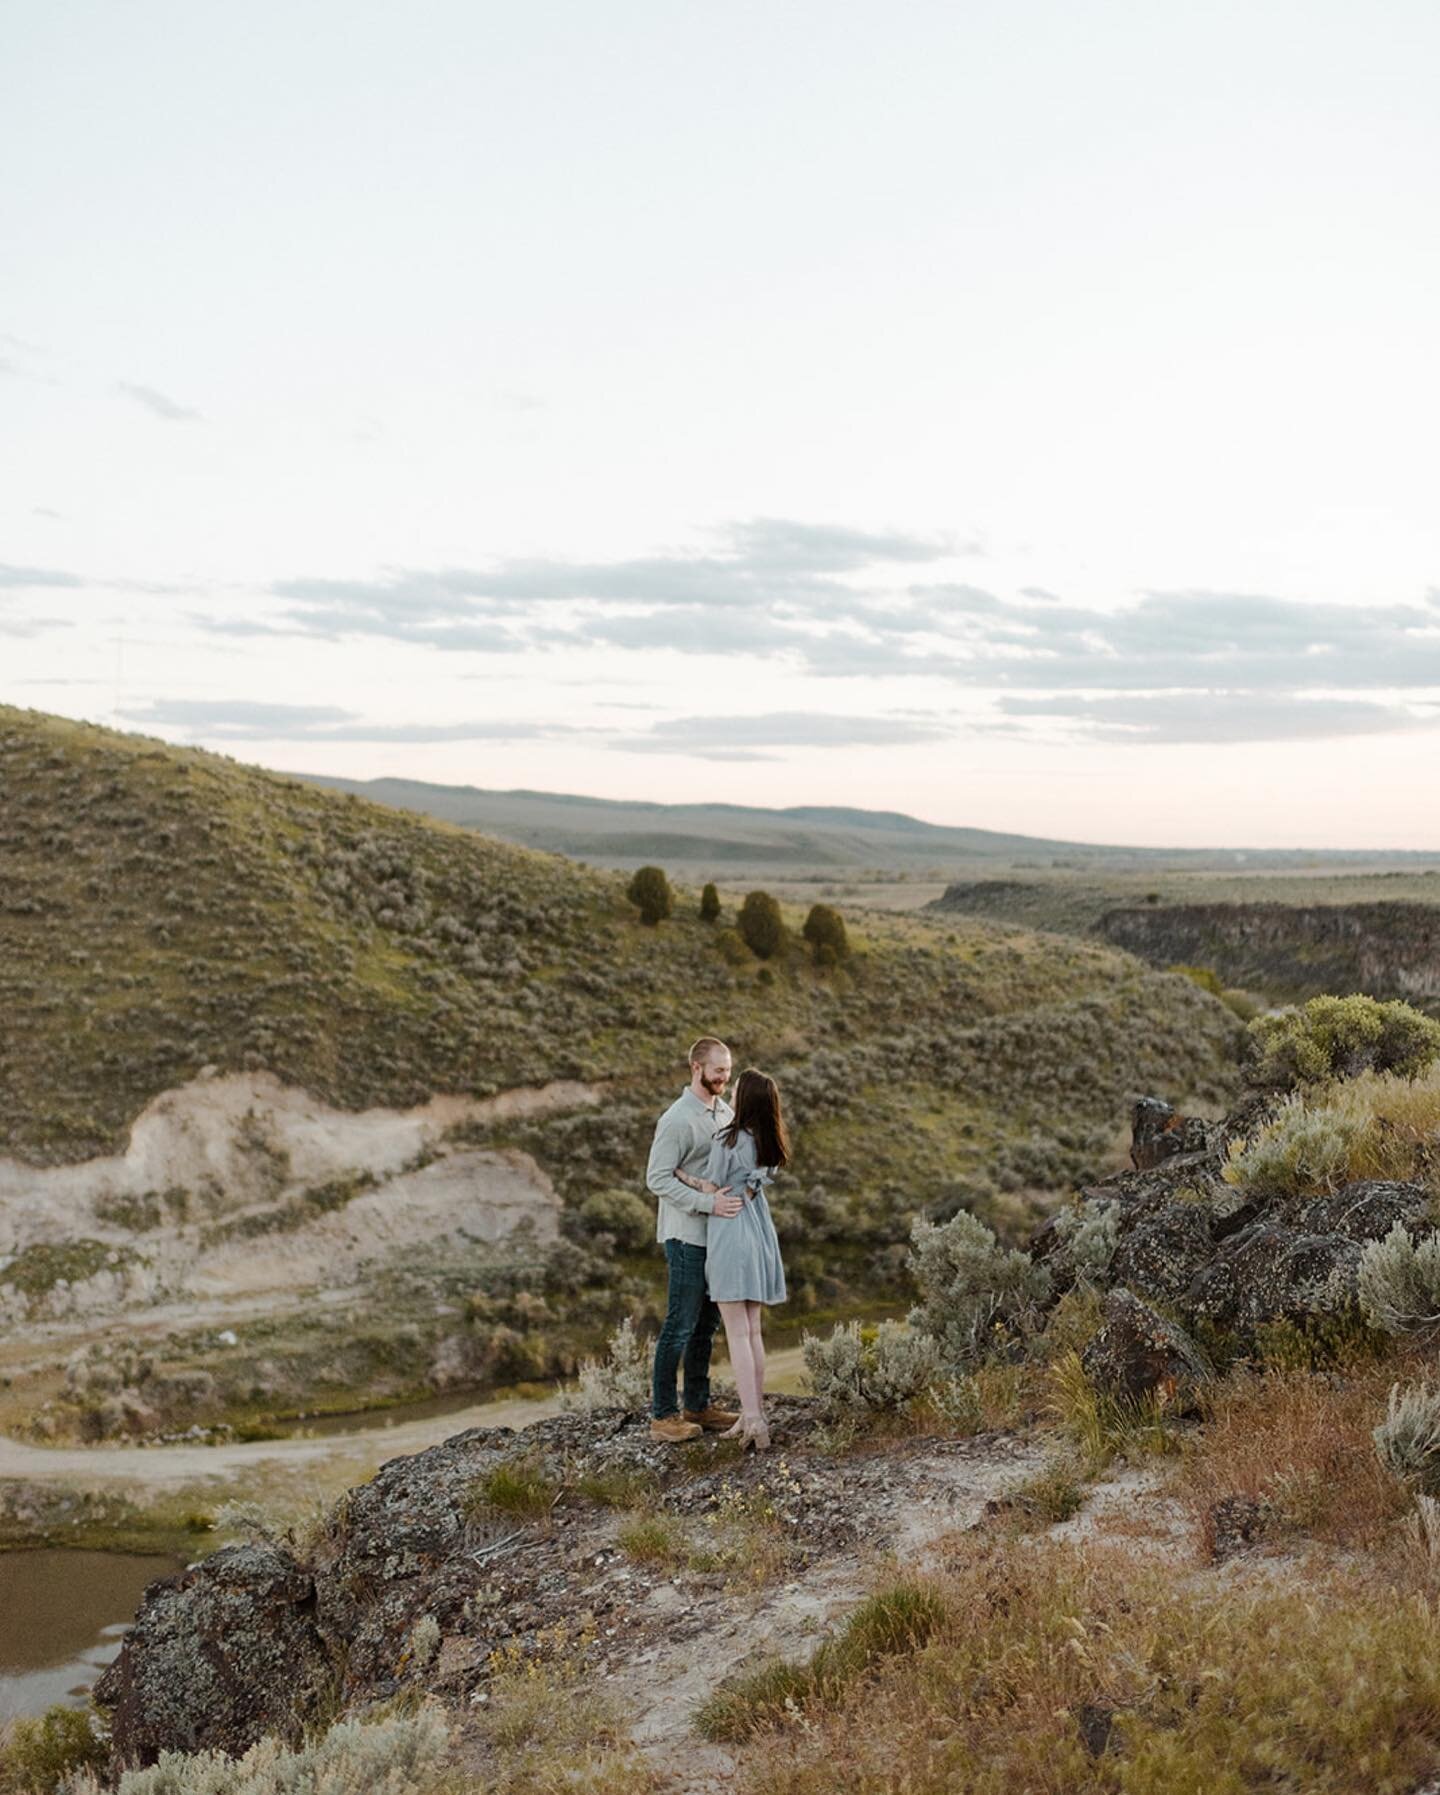 This is one of my favorite little hidden gem location in Idaho. Not a soul in sight. Cows roaming. Deer frolicking. And eagles soaring. 

#idahophotographer #seidahophotographer #springinidaho #idahoweddingphotographer